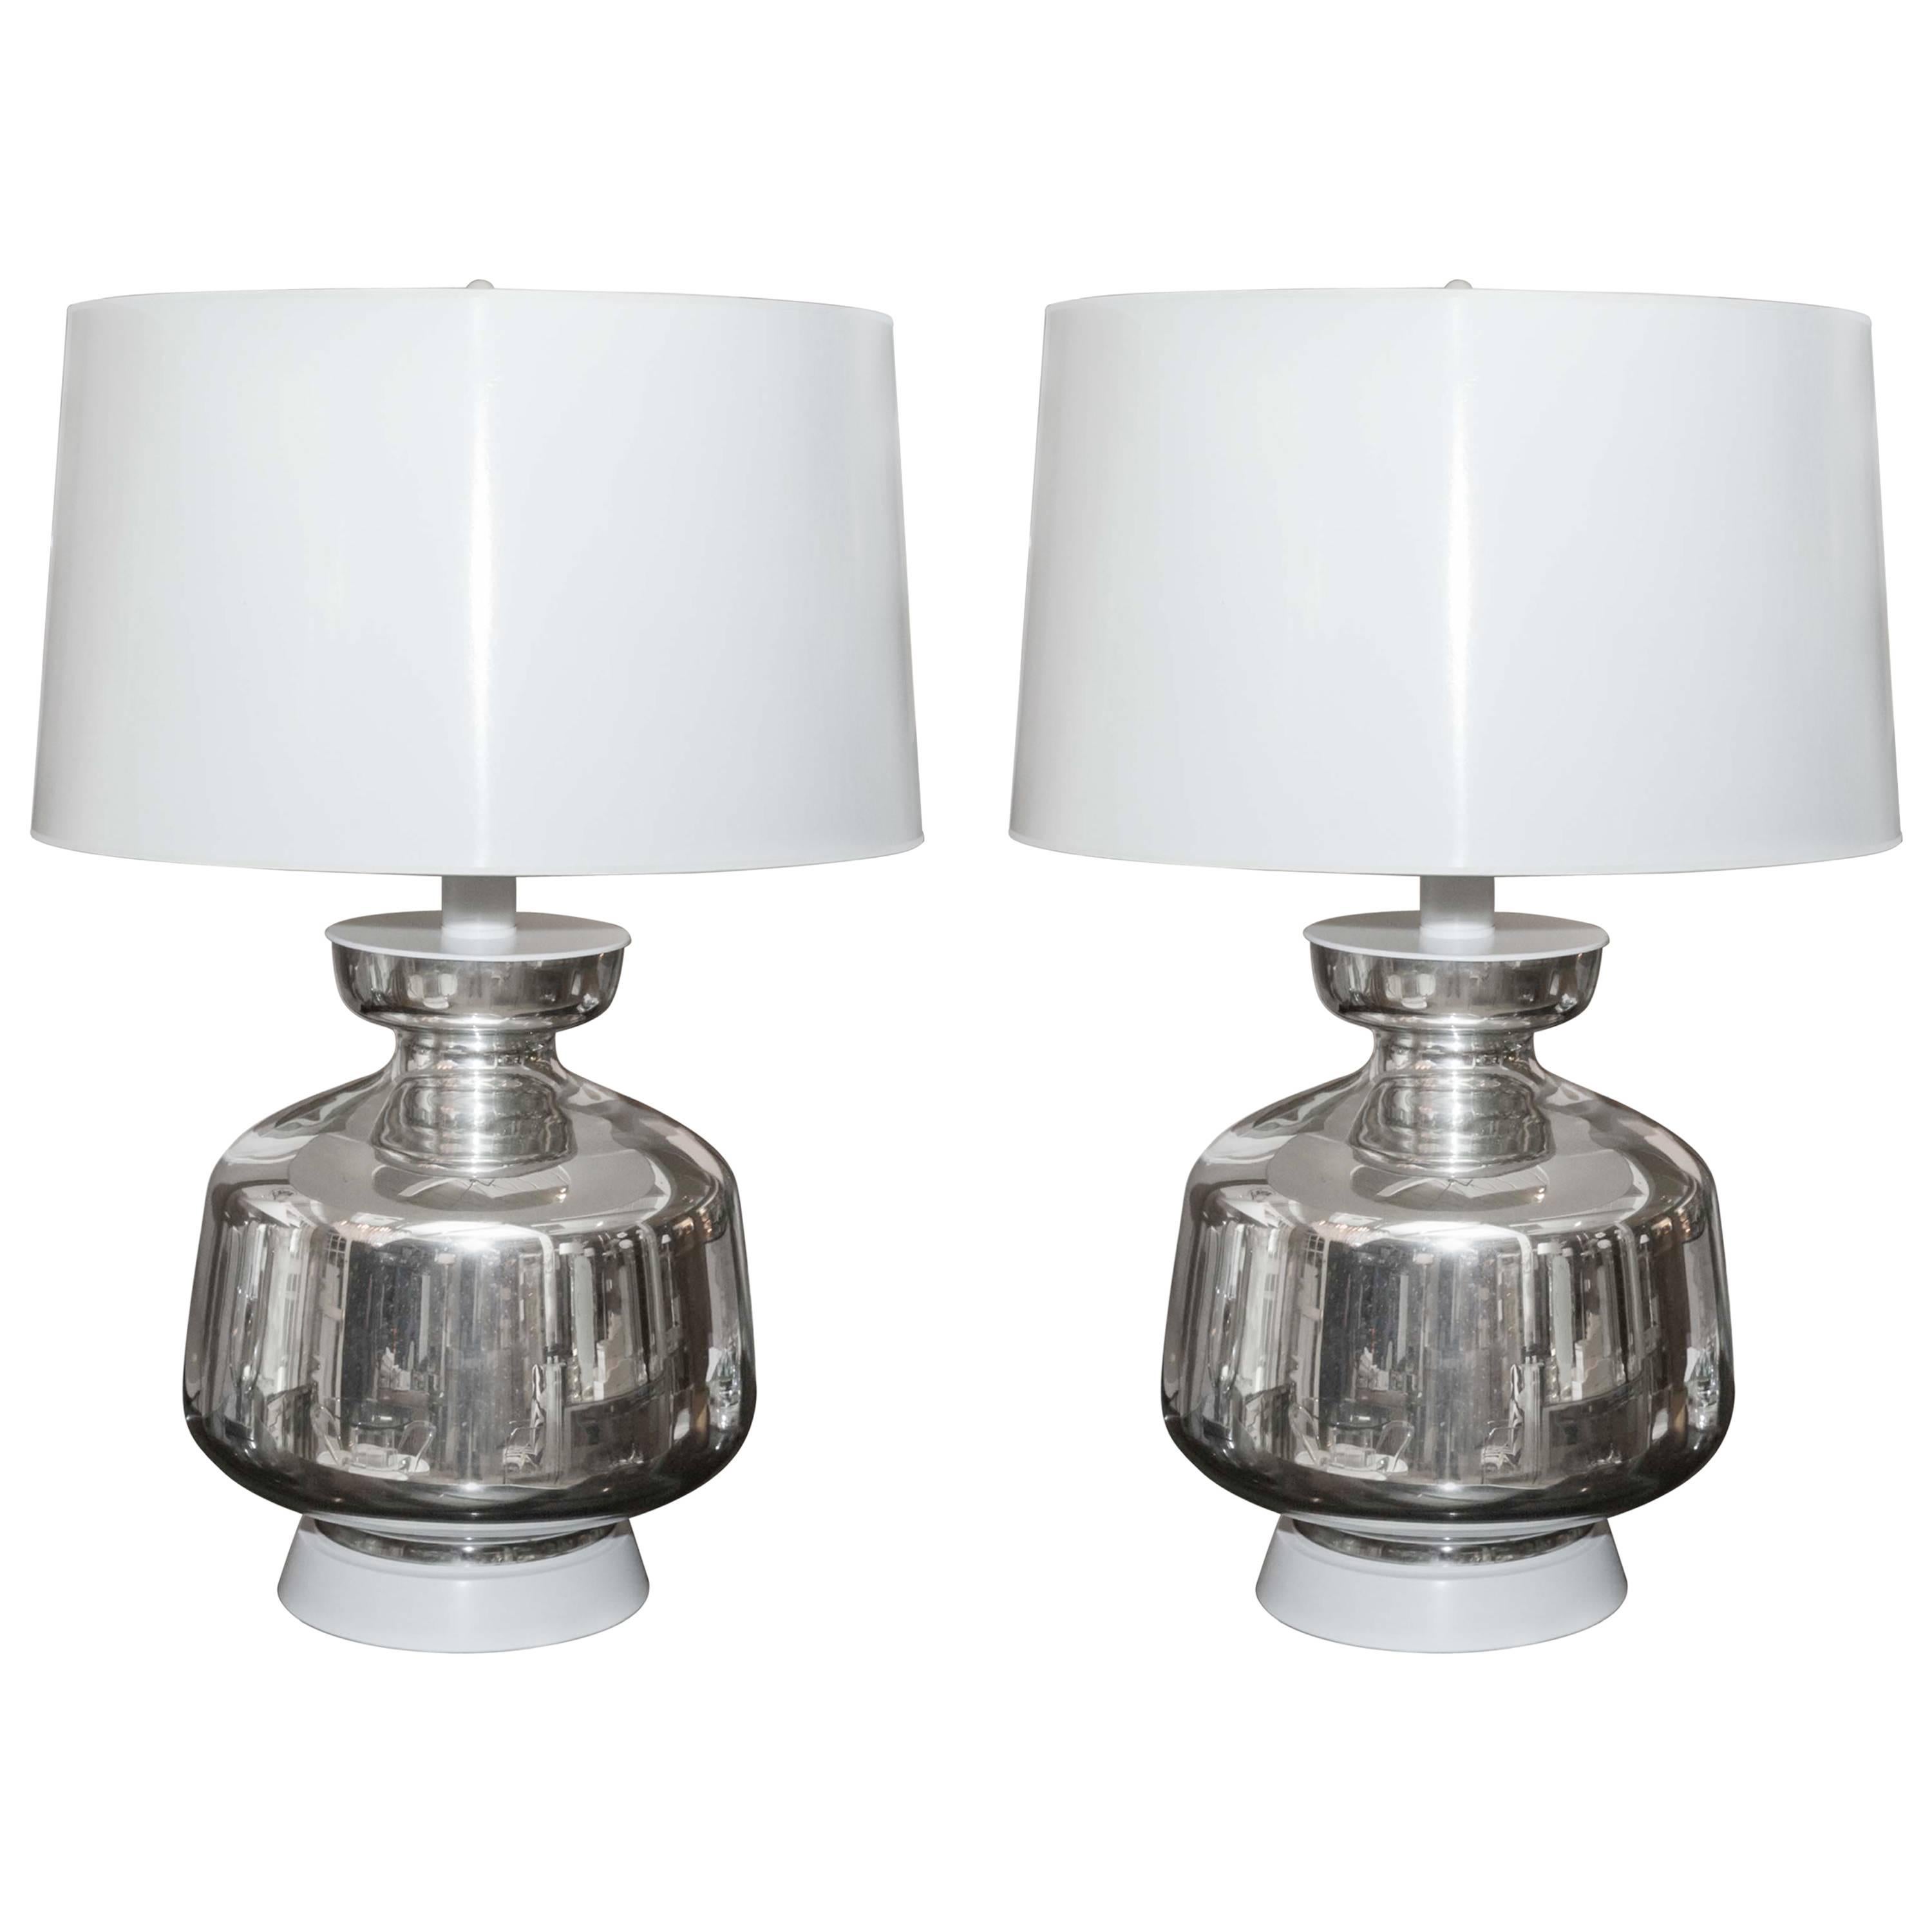 Spectacular Pair of Mid-Century Mercury Glass Lamps with Custom Shades